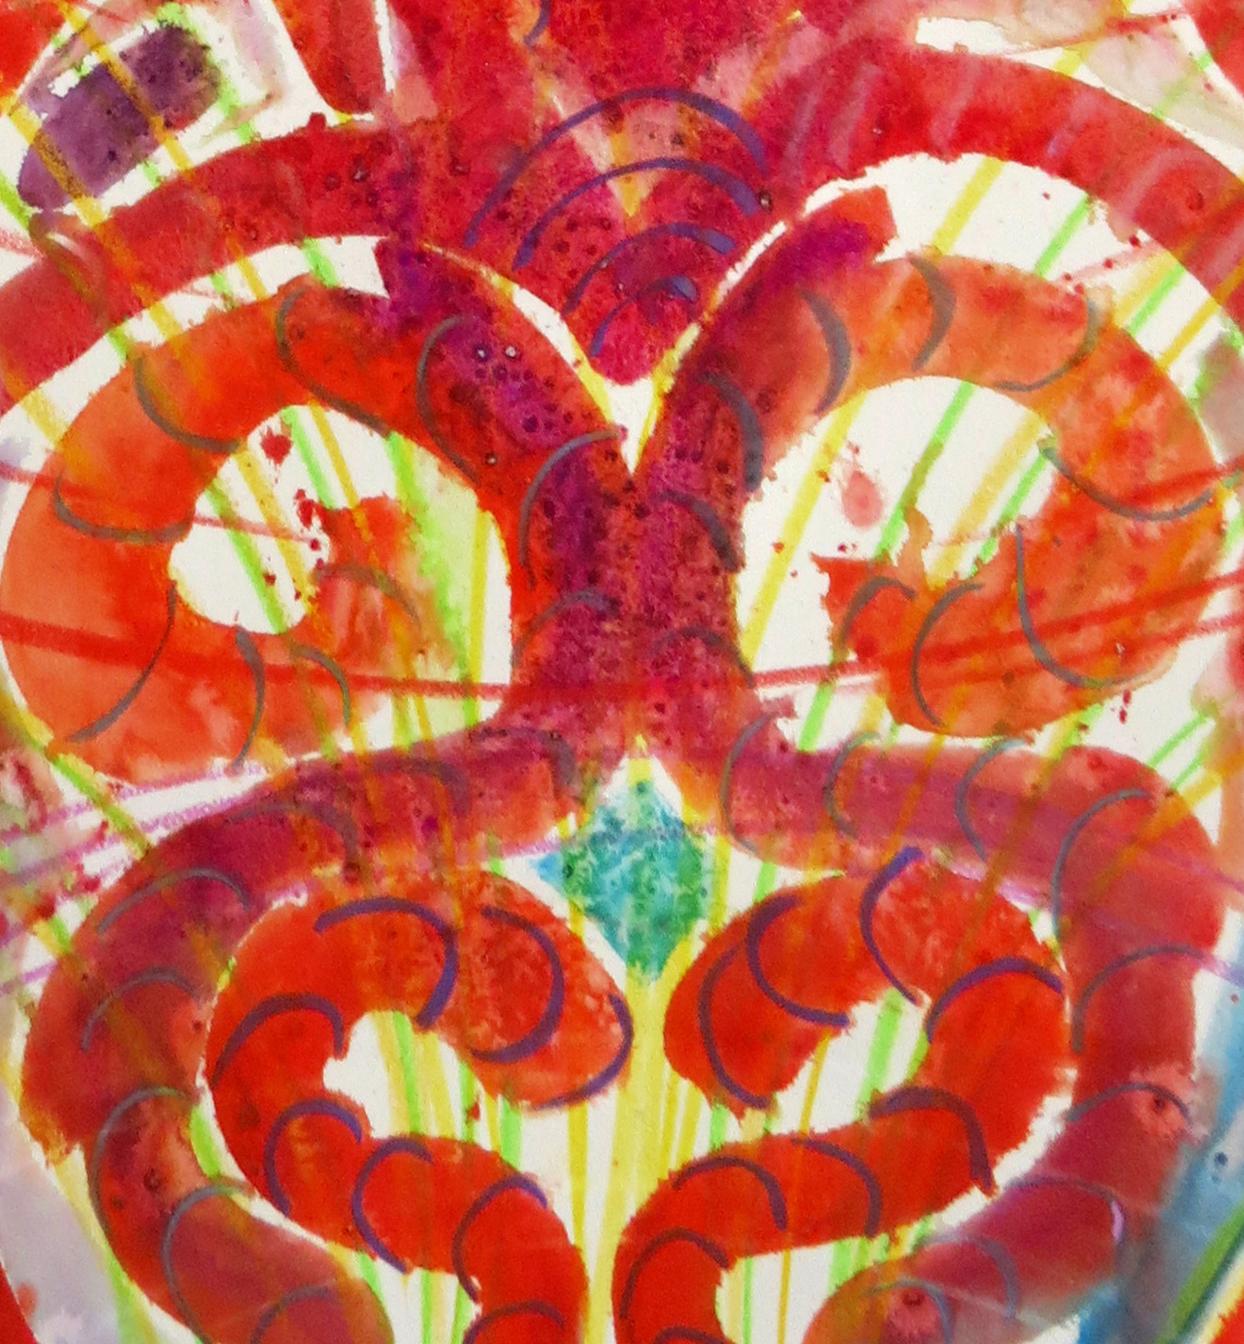 Hot Core, mythical, spiritual, abstract patterns, colorful, red, watercolor - Art by Janet Morgan